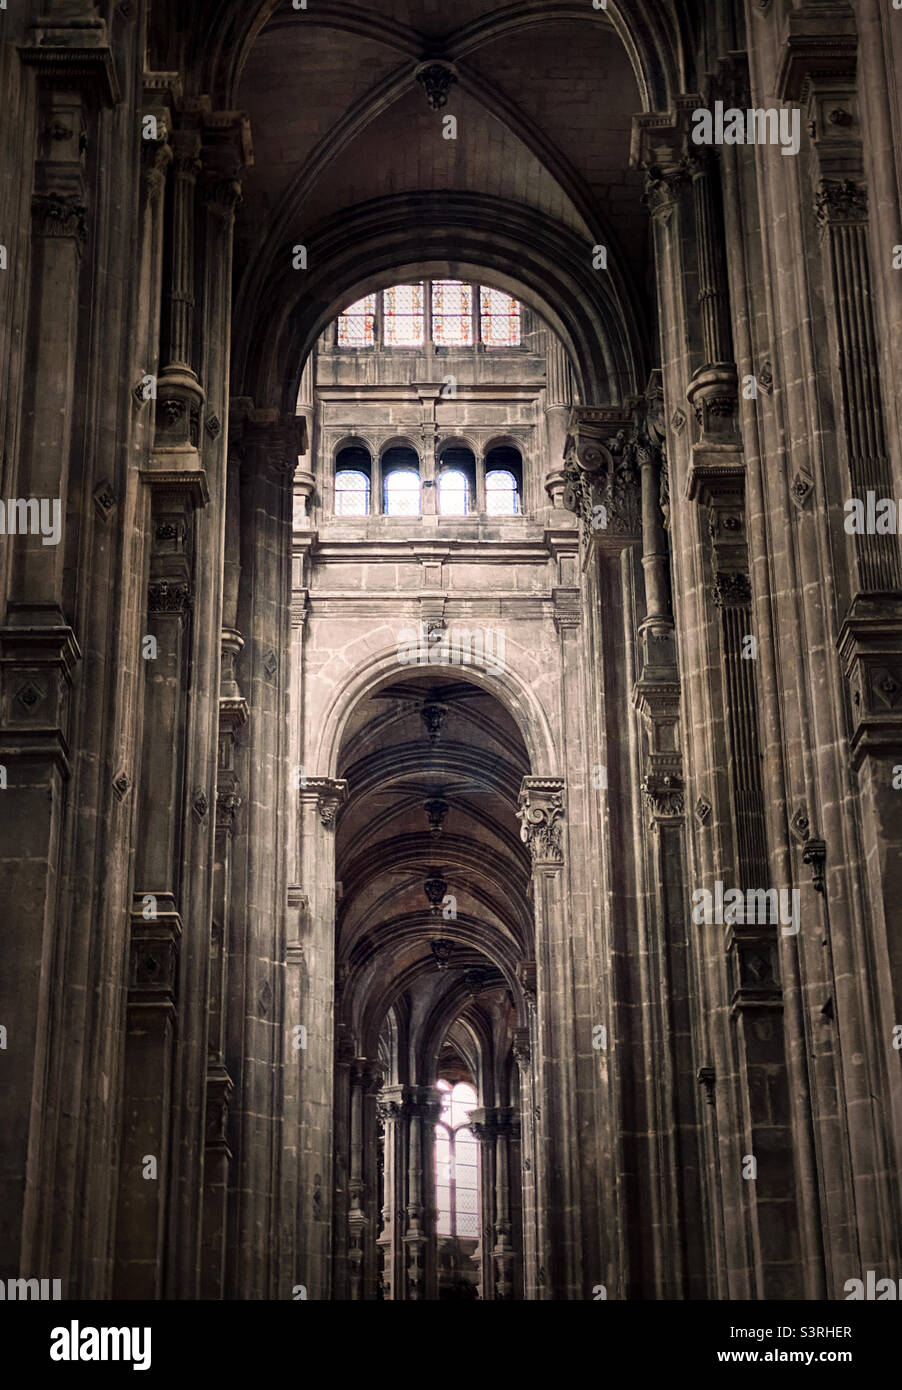 Gothic arched stone interior of St-Eustache church in Paris, France Stock Photo